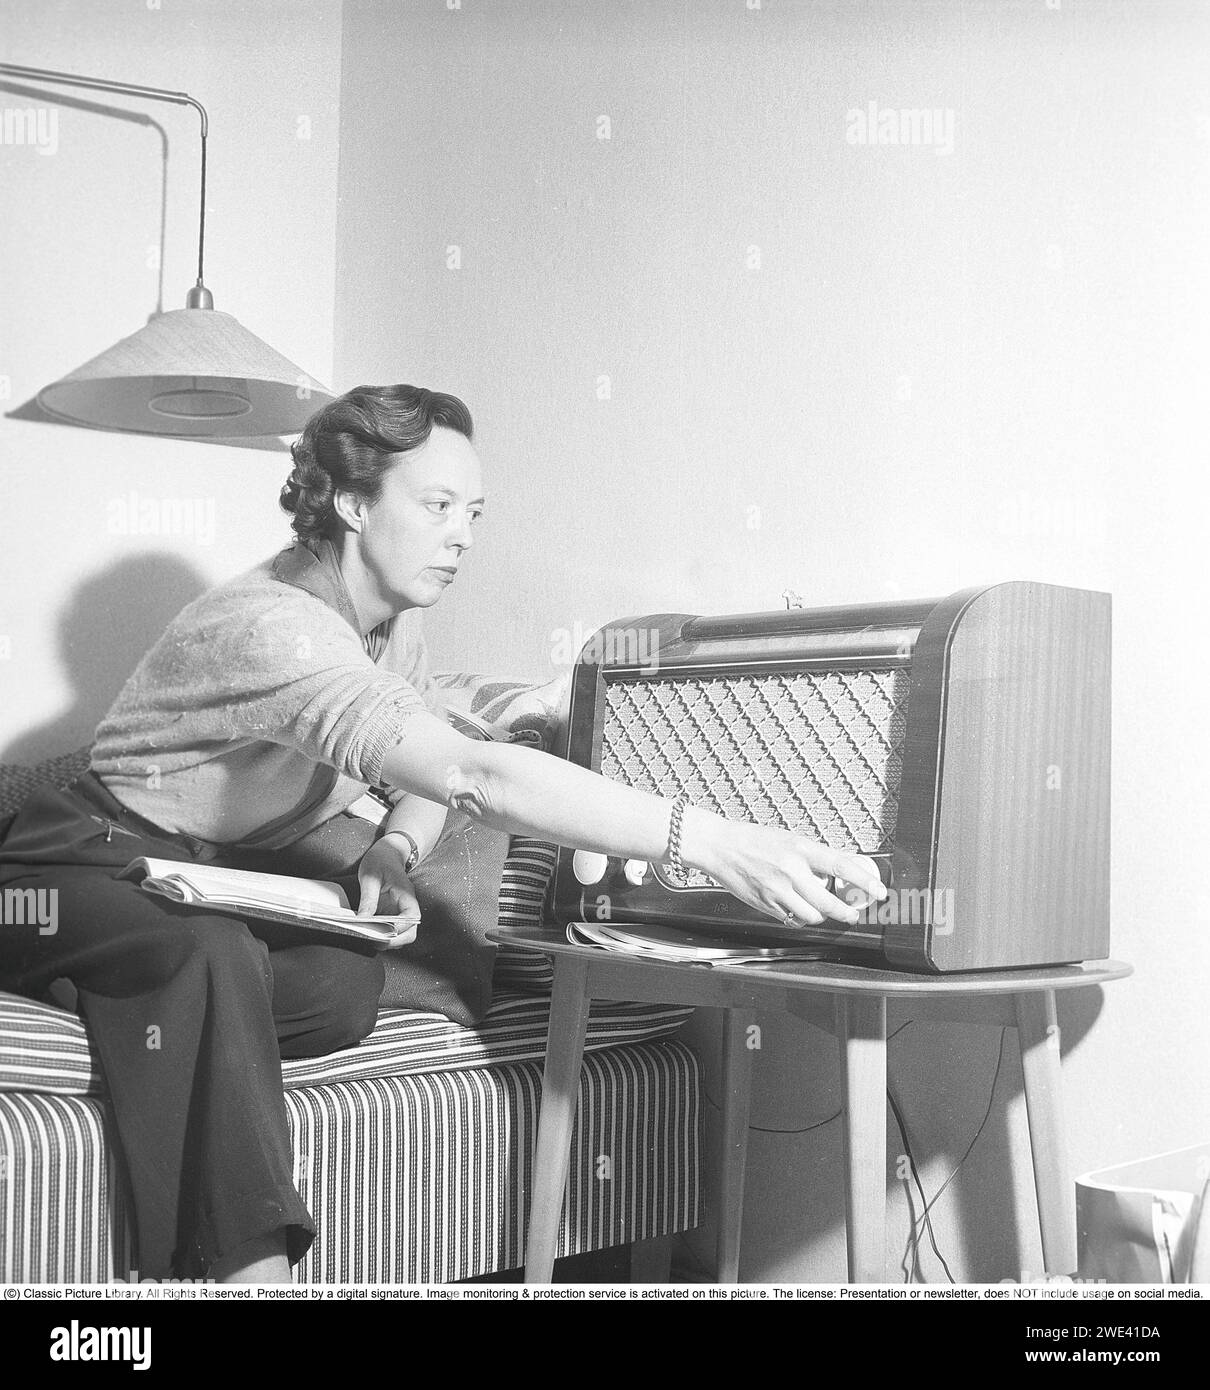 Ingrid Samuelsson, Swedish radio journalist who was one of the first female radio reporters in Swedish radio, which before the 1940s was completely dominated by men. Here at home by an AGA brand radio. She turns the knob to set the correct radio frequency to receive the radio broadcast. The upper part of the radio shows which station is broadcasting when you turn the dial. In addition to FM broadcasts, foreign radio stations were also listened to on longwave. 1950 Krisoffersson ref AY3-4 Stock Photo